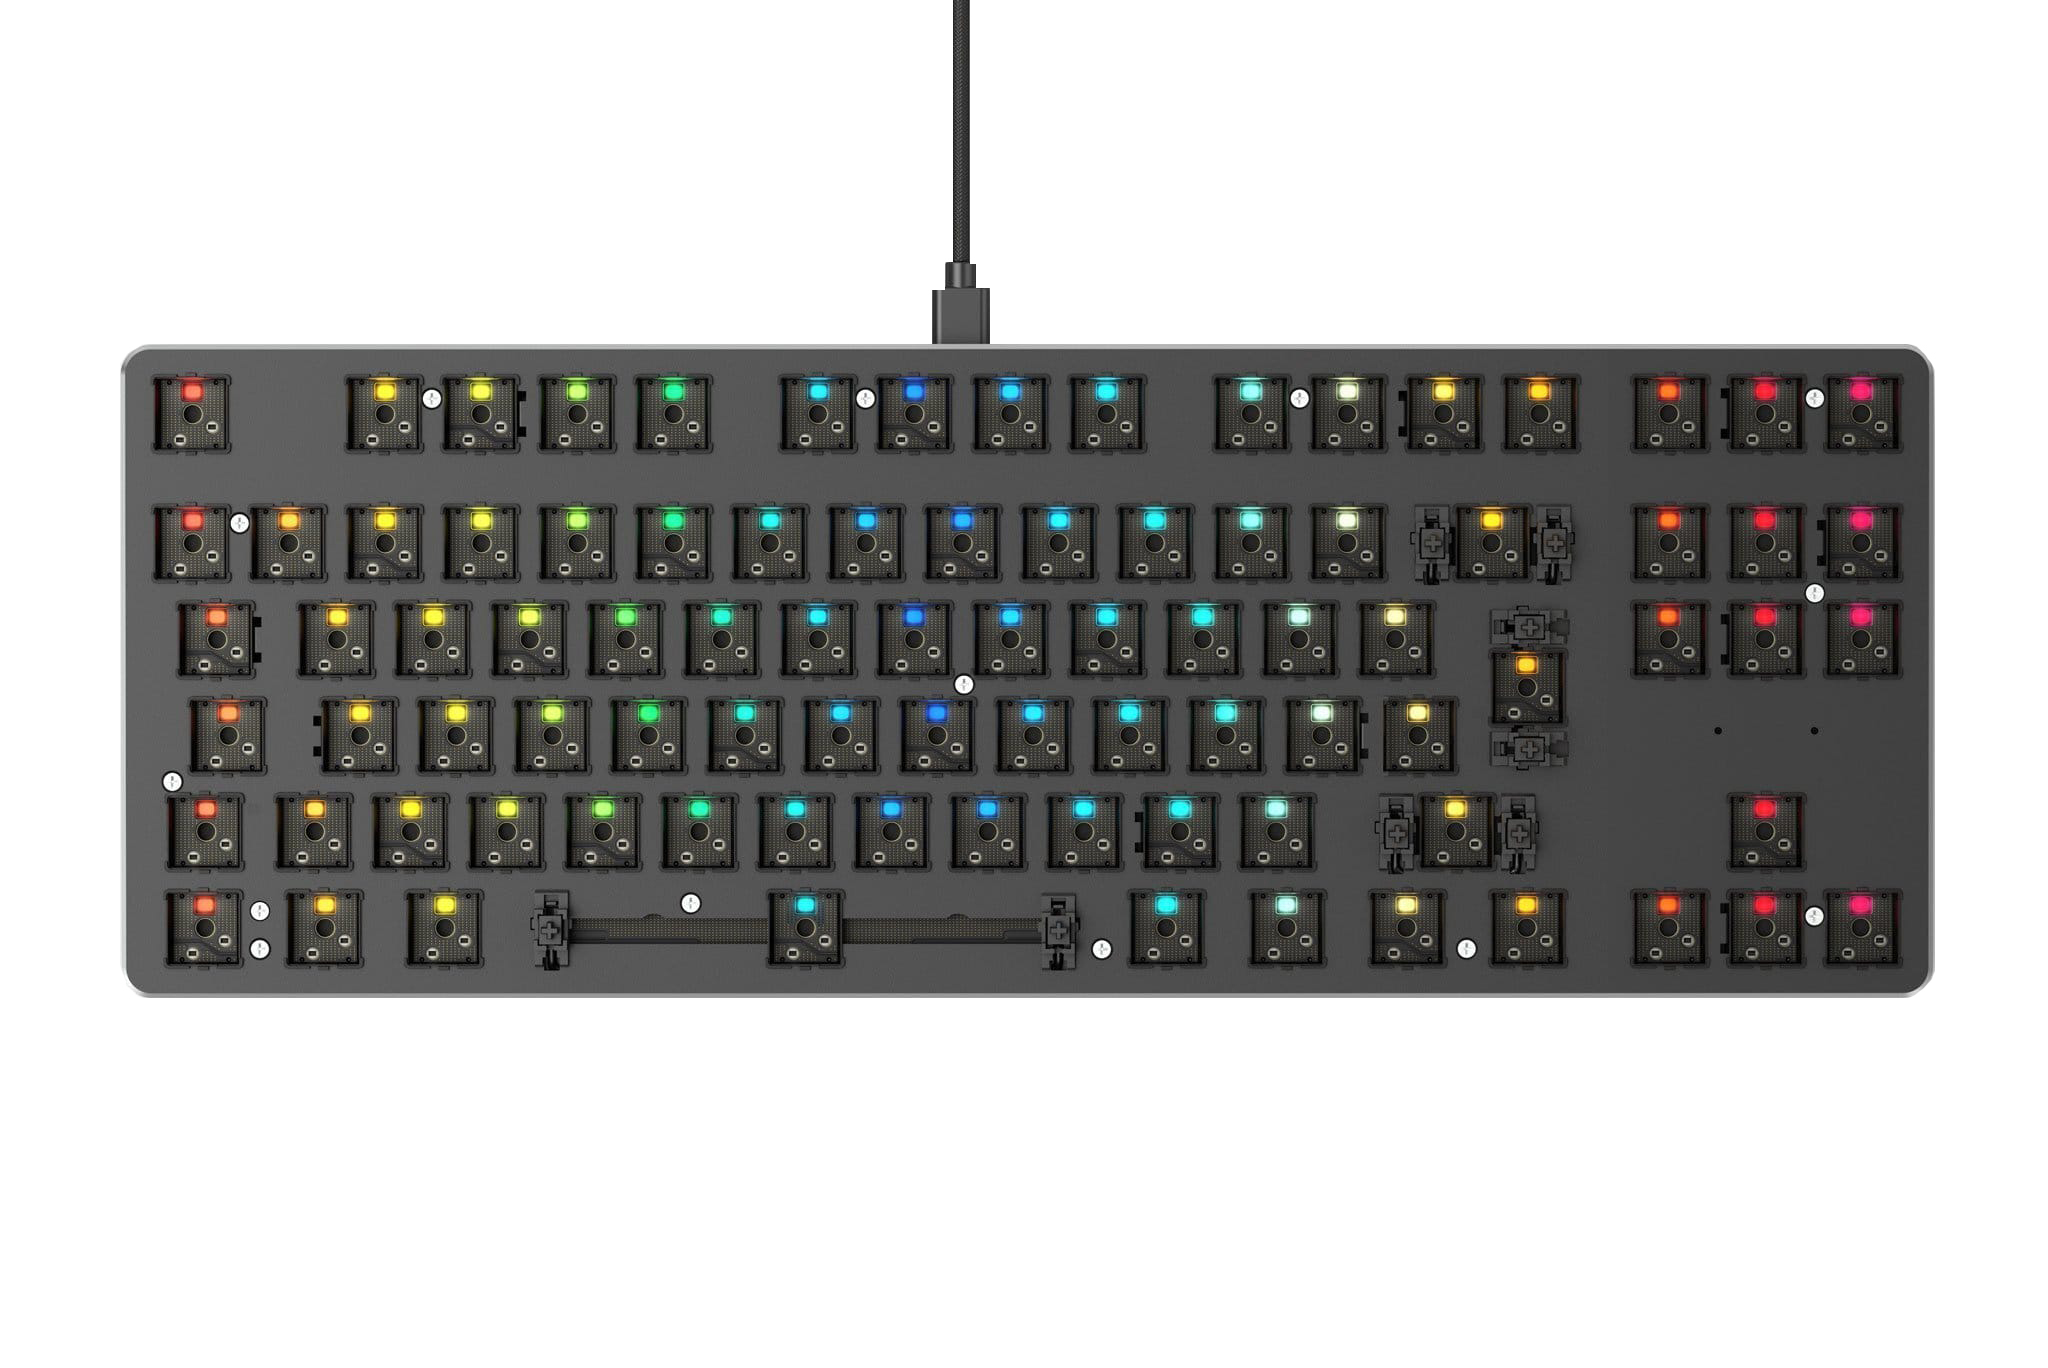 Glorious PC Gaming Race The Glorious GMMK-TKL